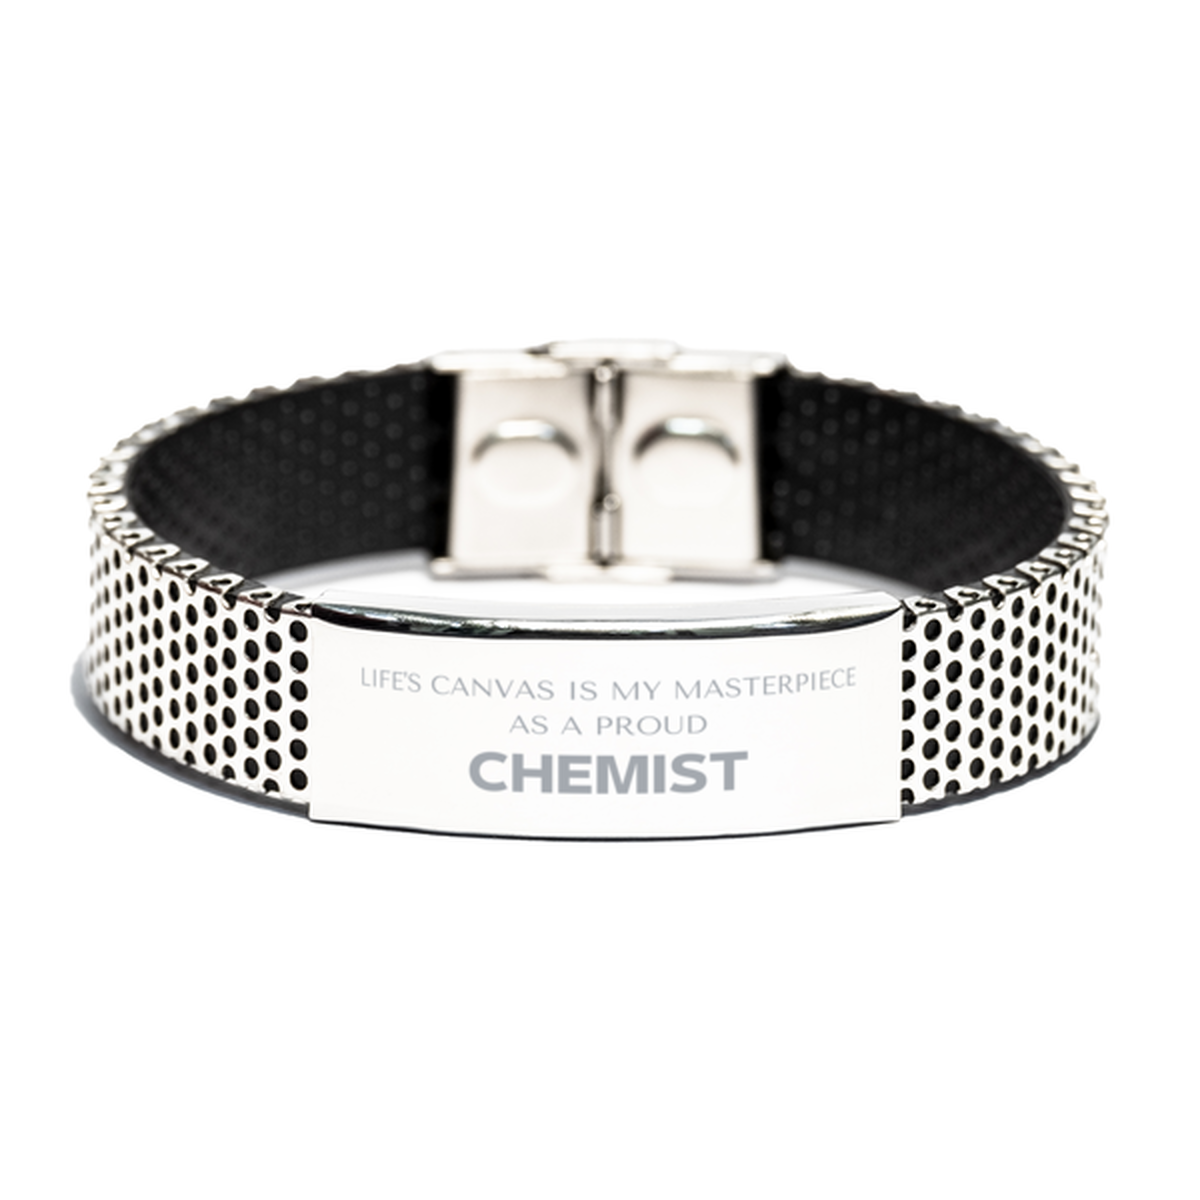 Proud Chemist Gifts, Life's canvas is my masterpiece, Epic Birthday Christmas Unique Stainless Steel Bracelet For Chemist, Coworkers, Men, Women, Friends